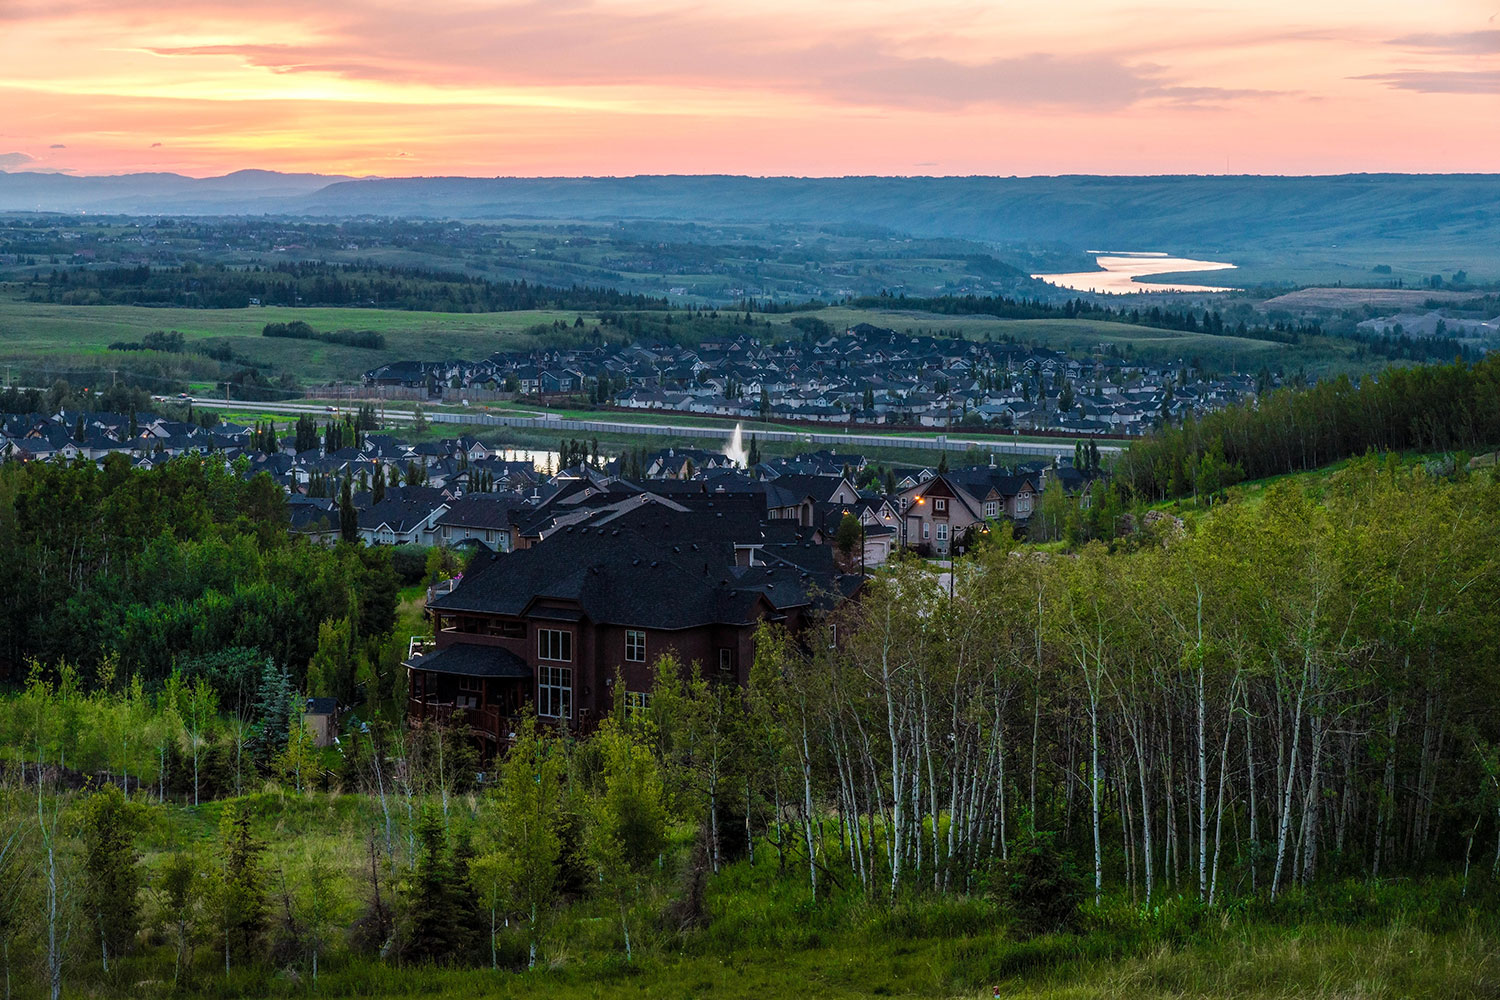 Estate homes in Crestmont View offer stunning views of the river valley, aspen forests and the mountains.
Courtesy Qualico Communities